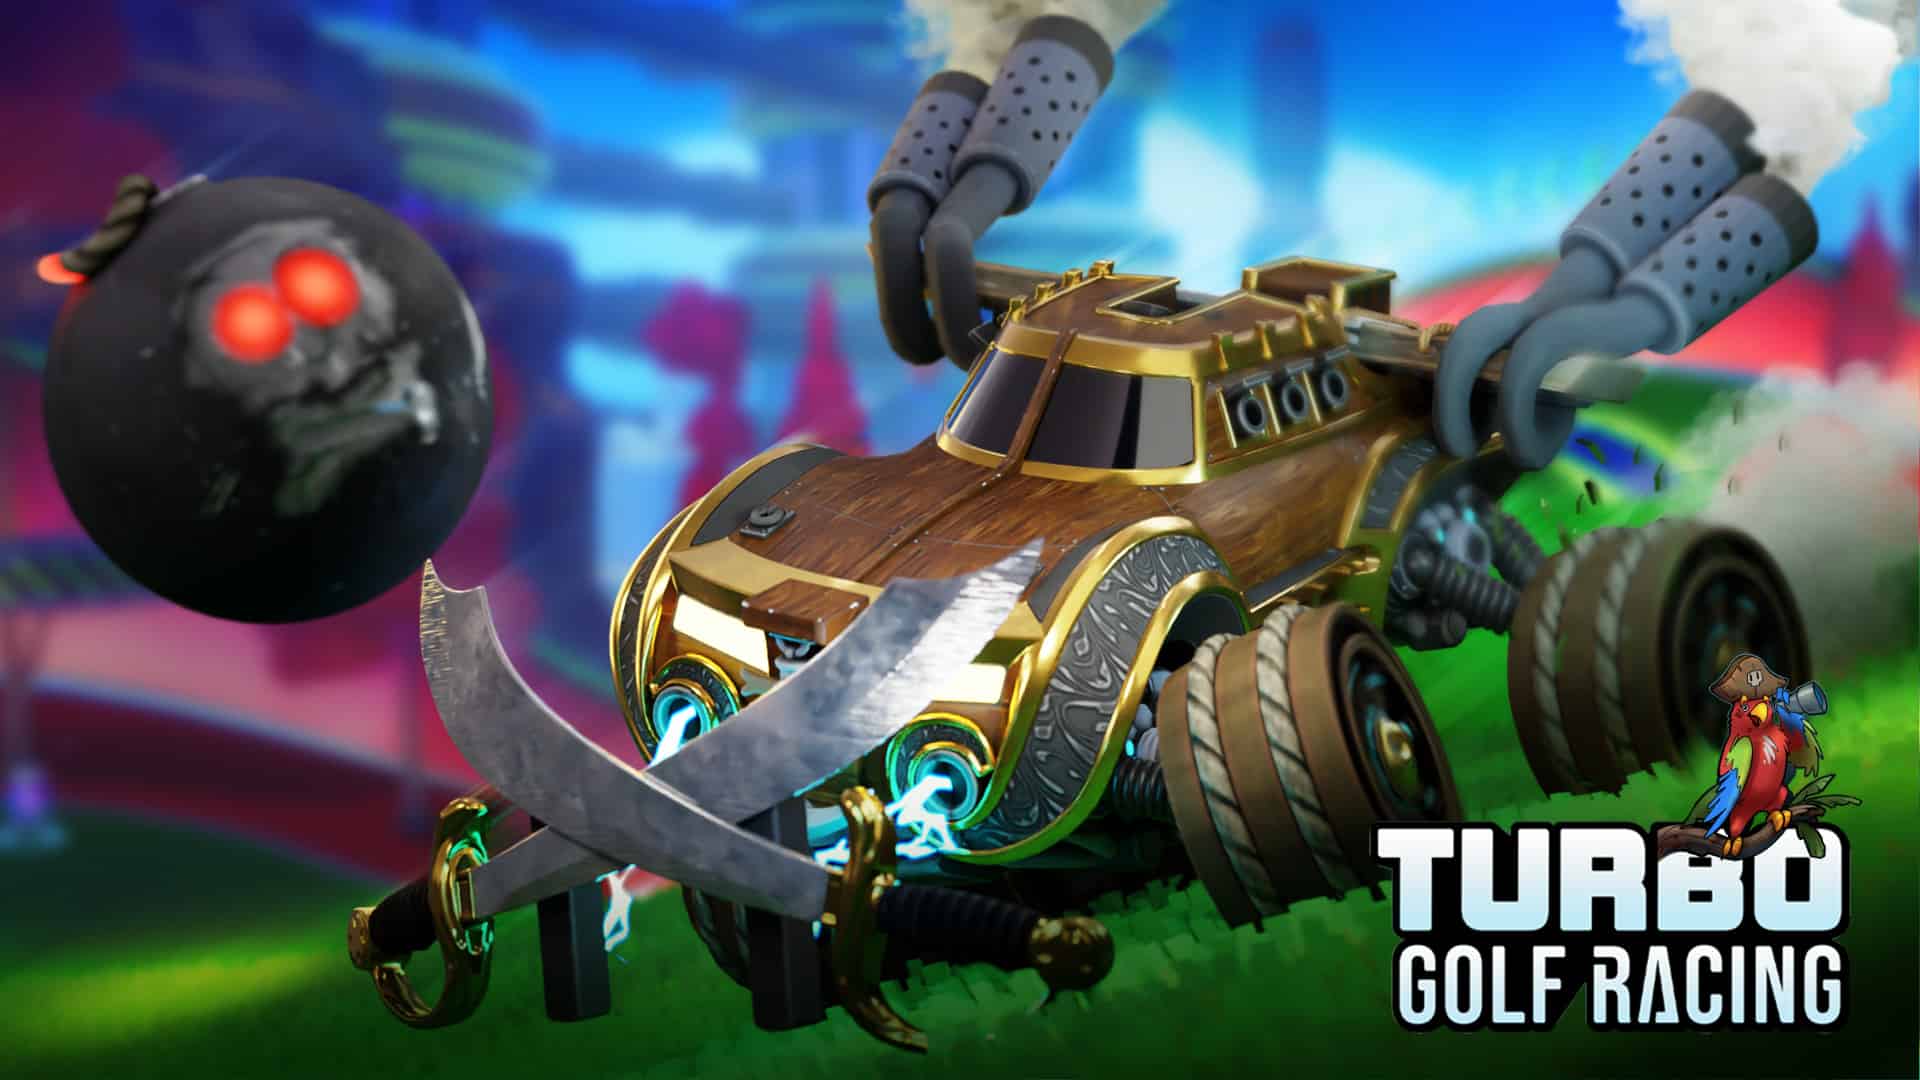 Turbo Golf Racing gifts players with Pirate Update after reaching one million mark